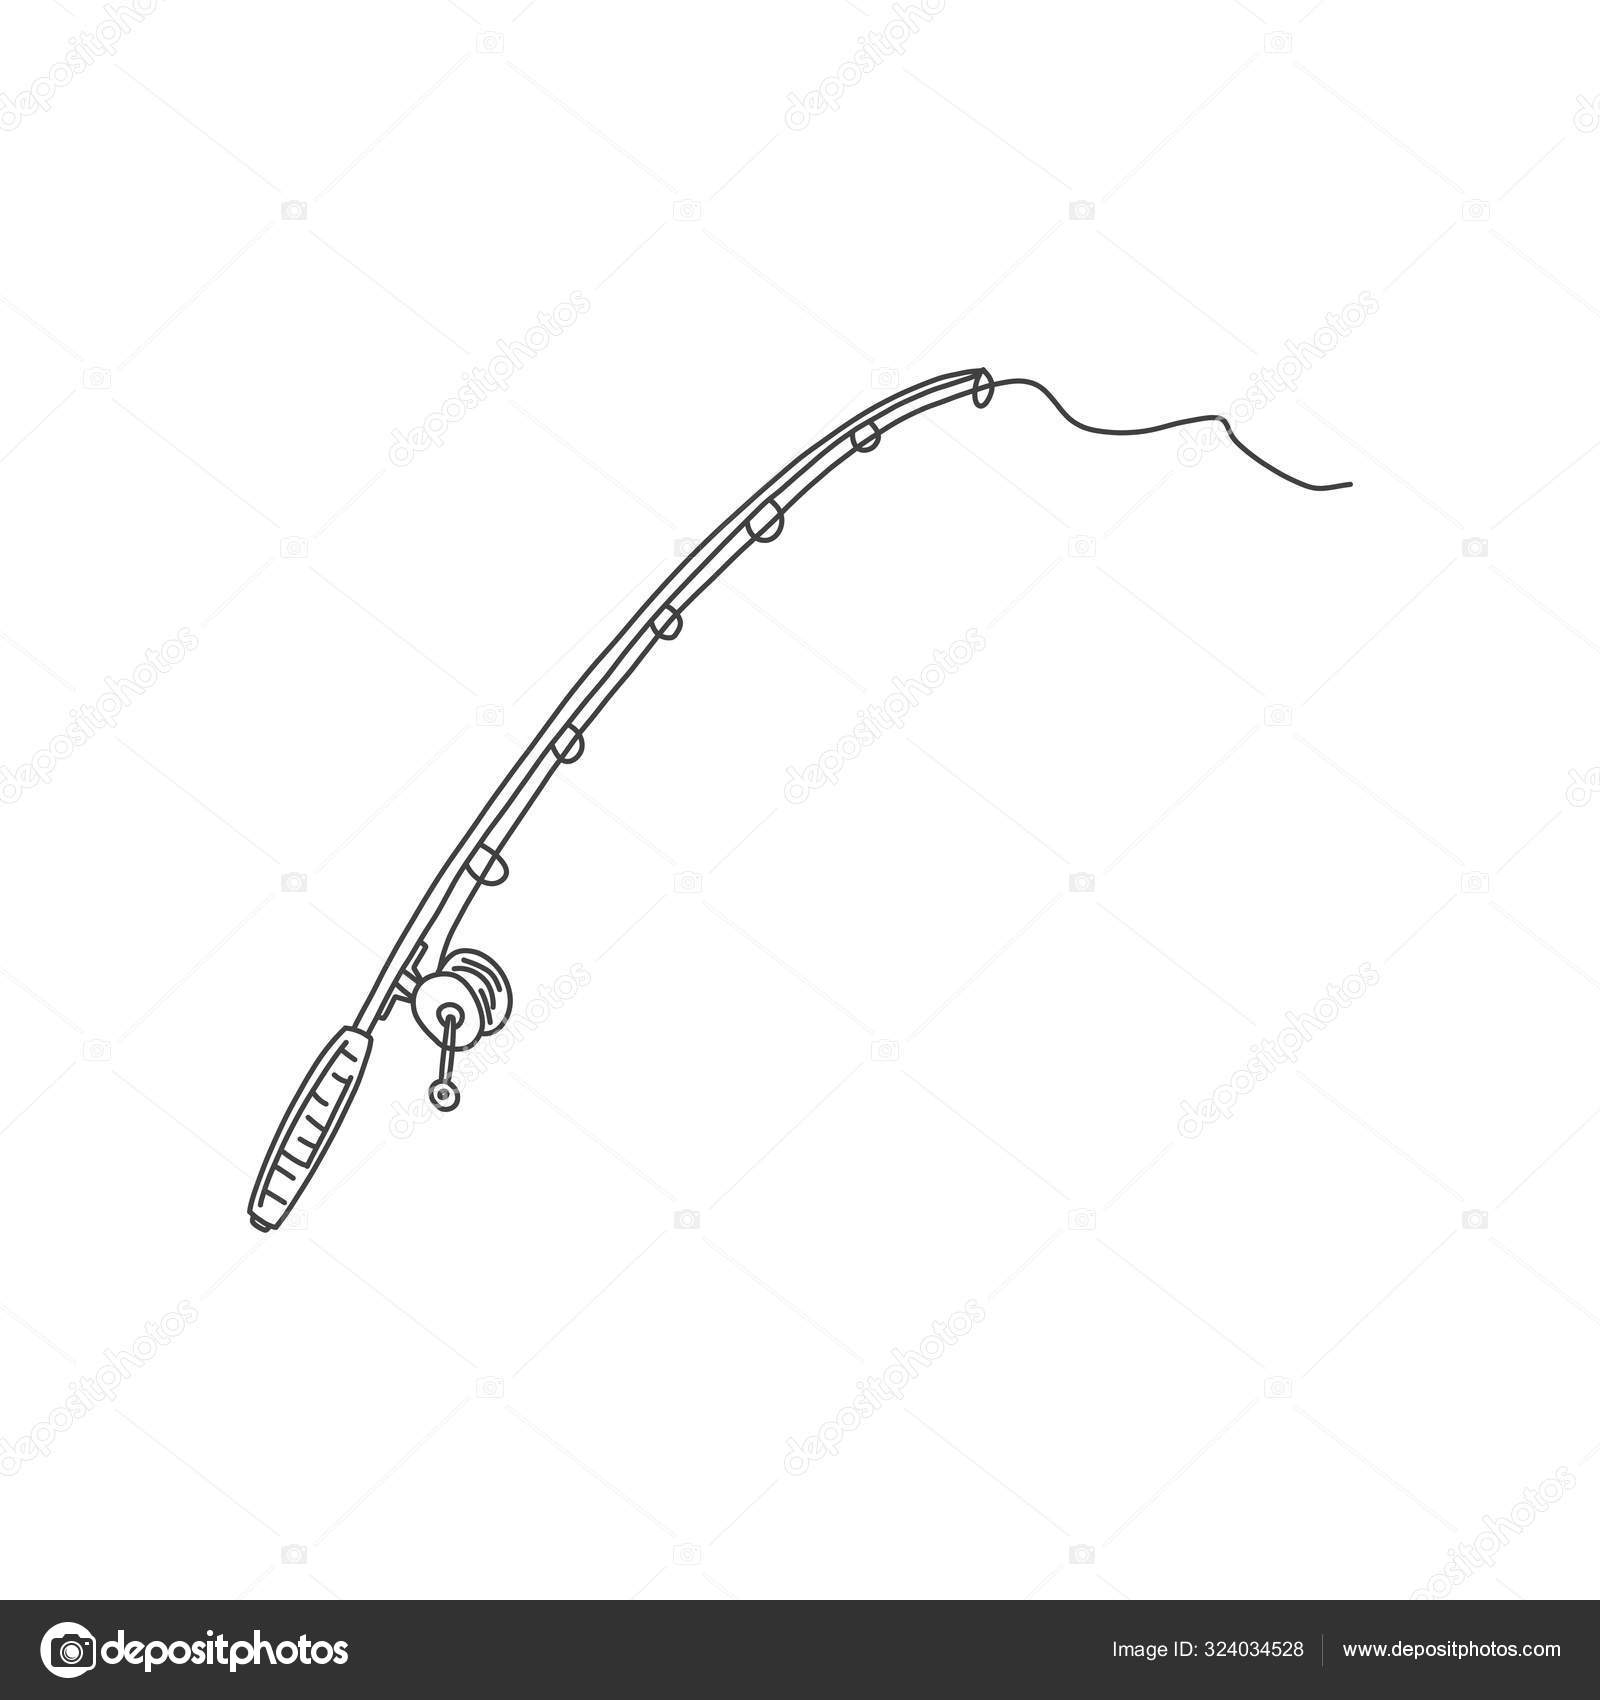 United fishing rod, sketch hand drawn fish art. Stock Vector by ©symkin  324034528